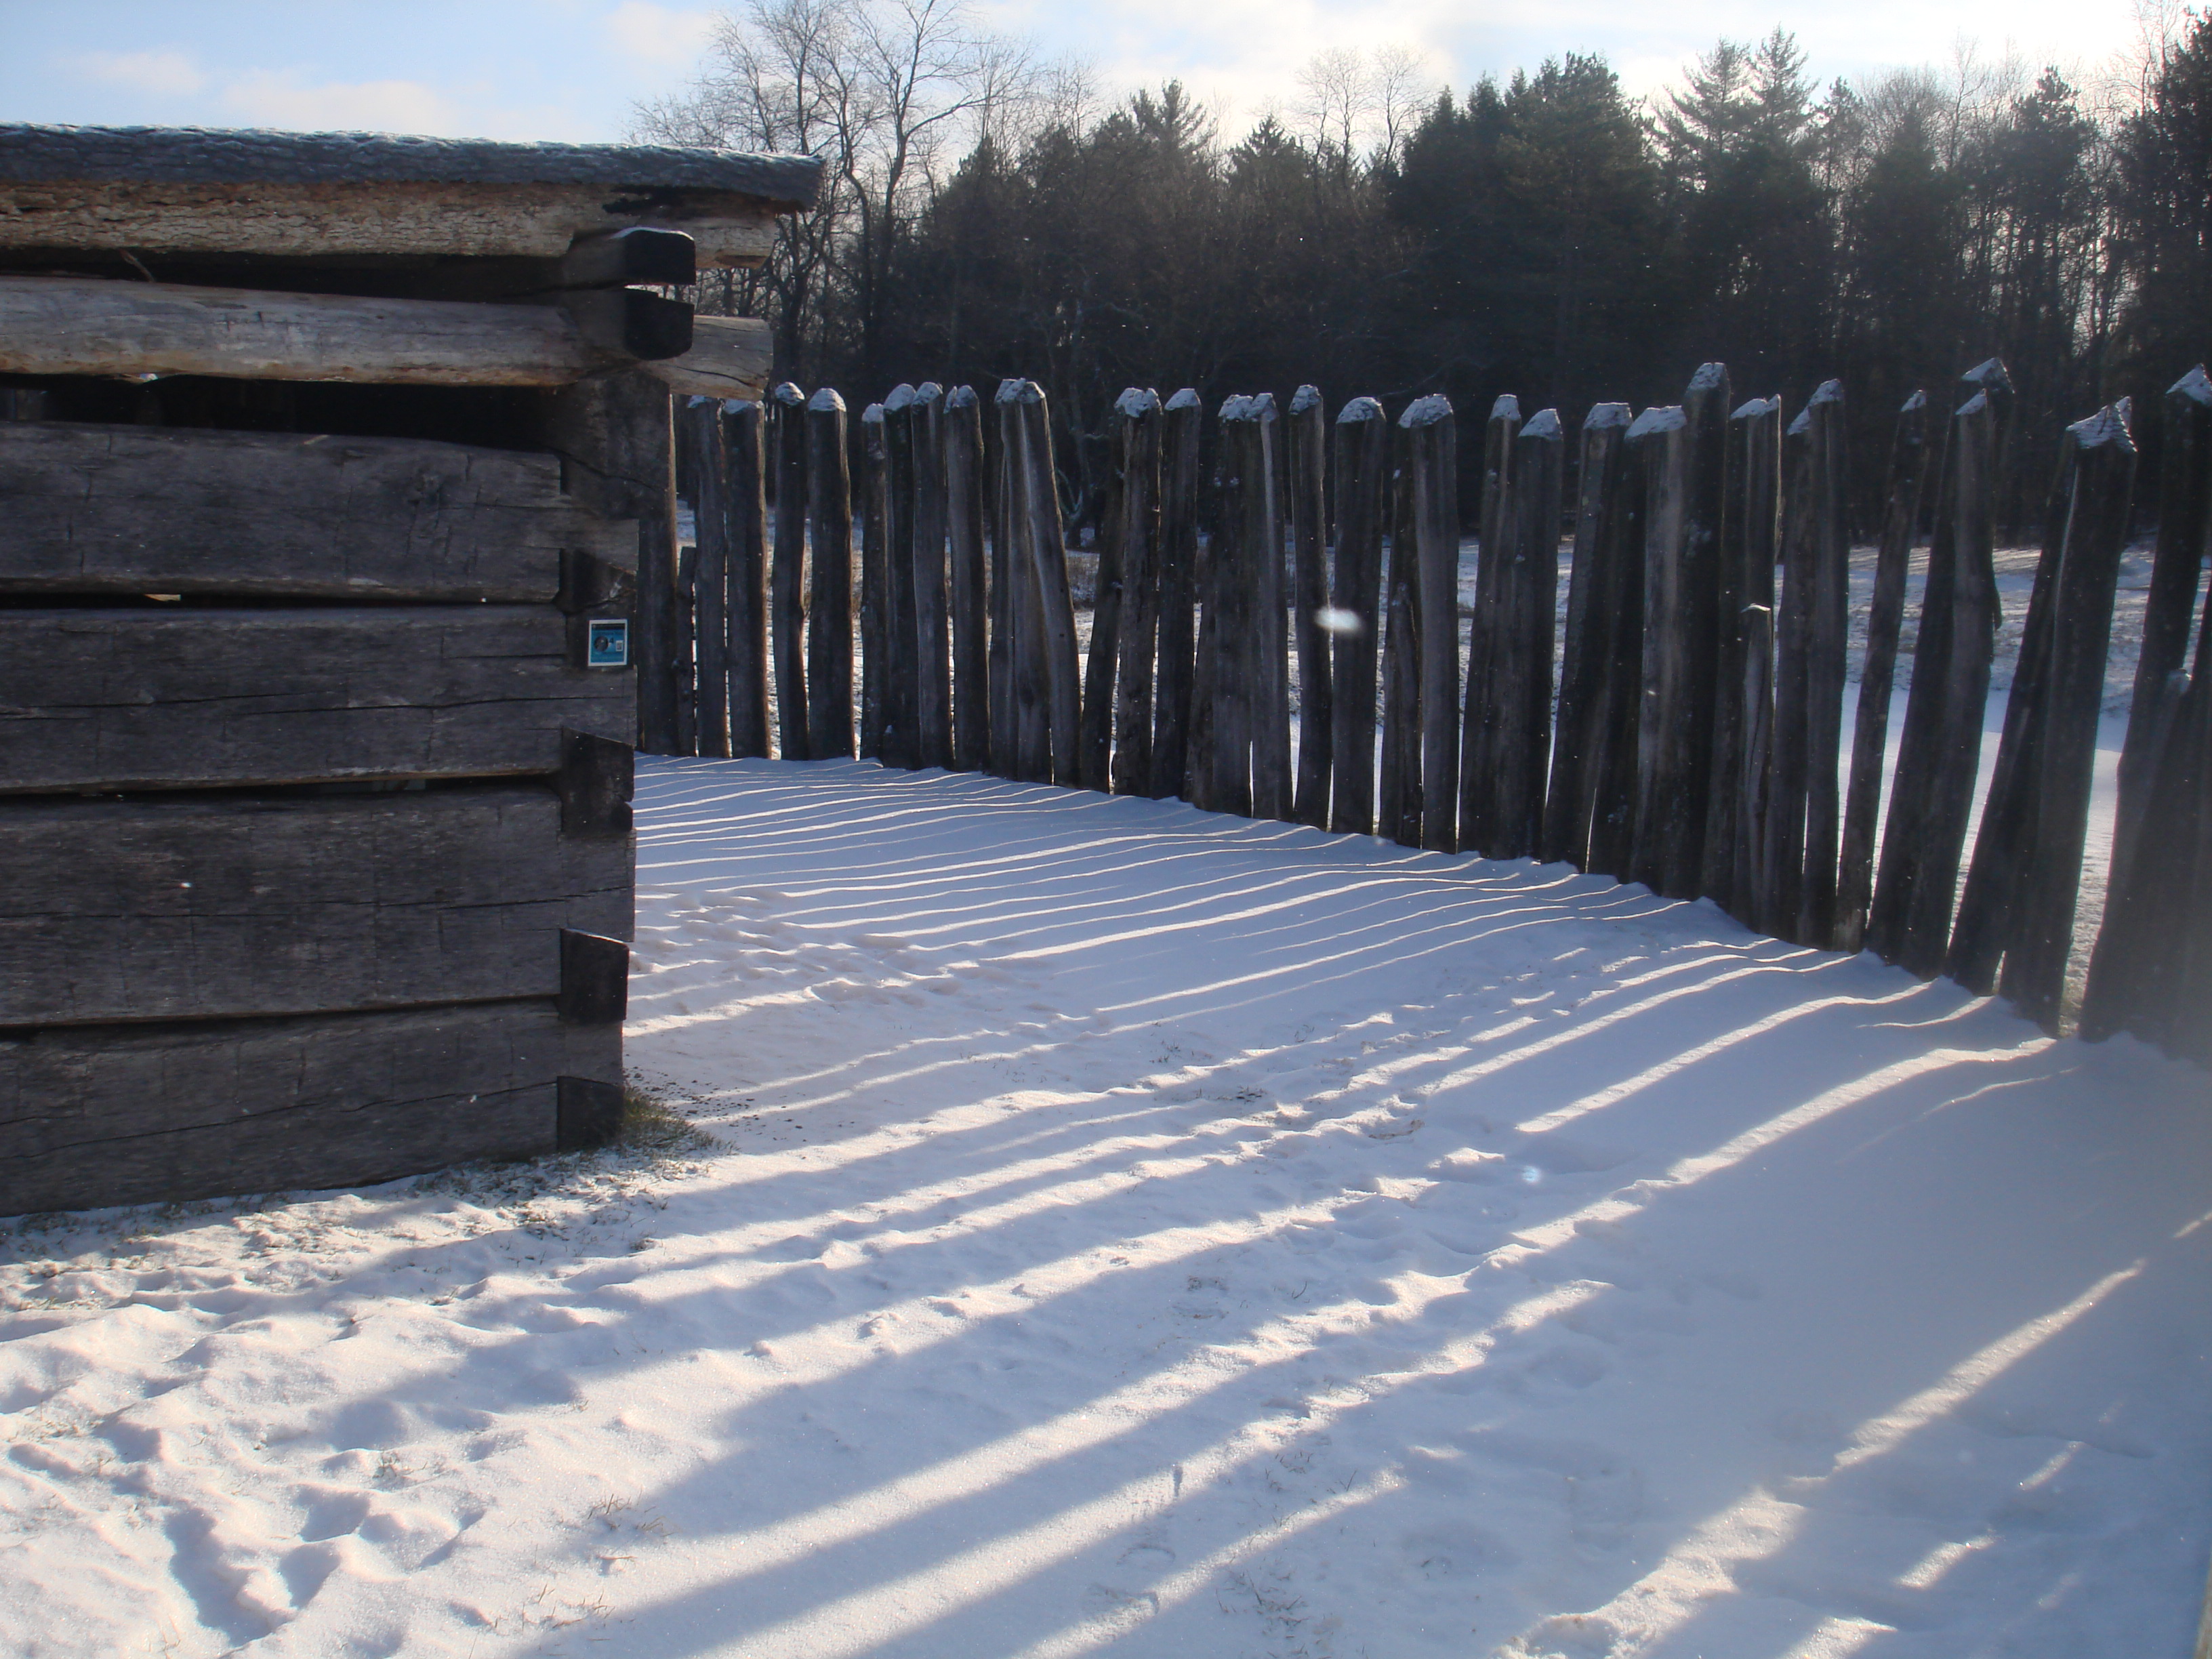 Fort cabin and stockade with shadow on snow